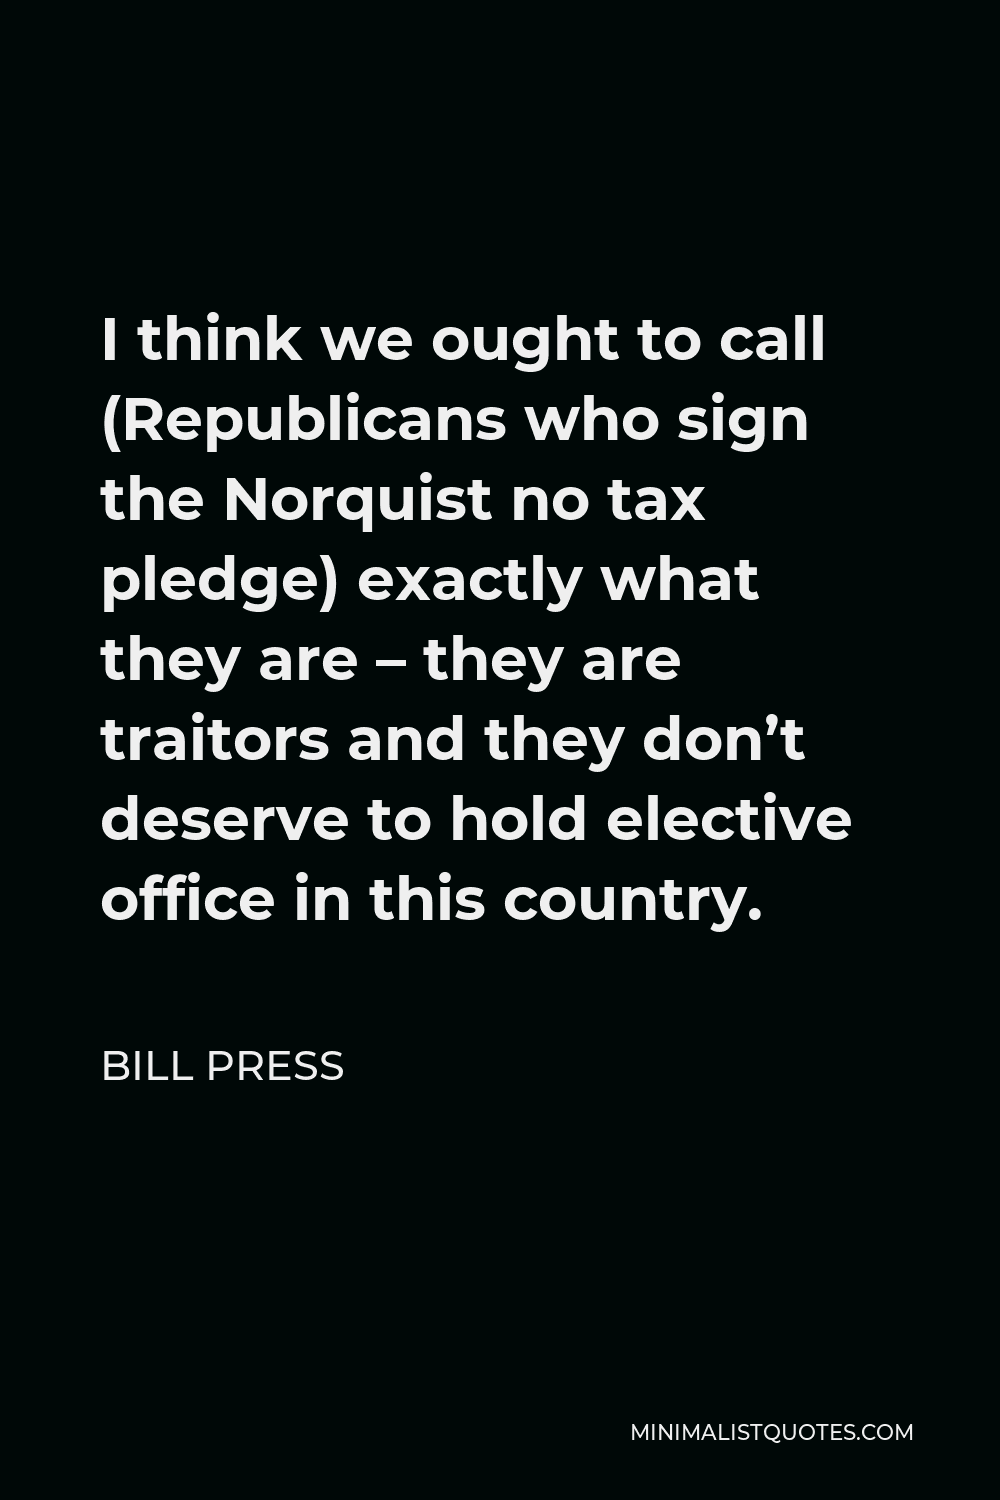 Bill Press Quote - I think we ought to call (Republicans who sign the Norquist no tax pledge) exactly what they are – they are traitors and they don’t deserve to hold elective office in this country.